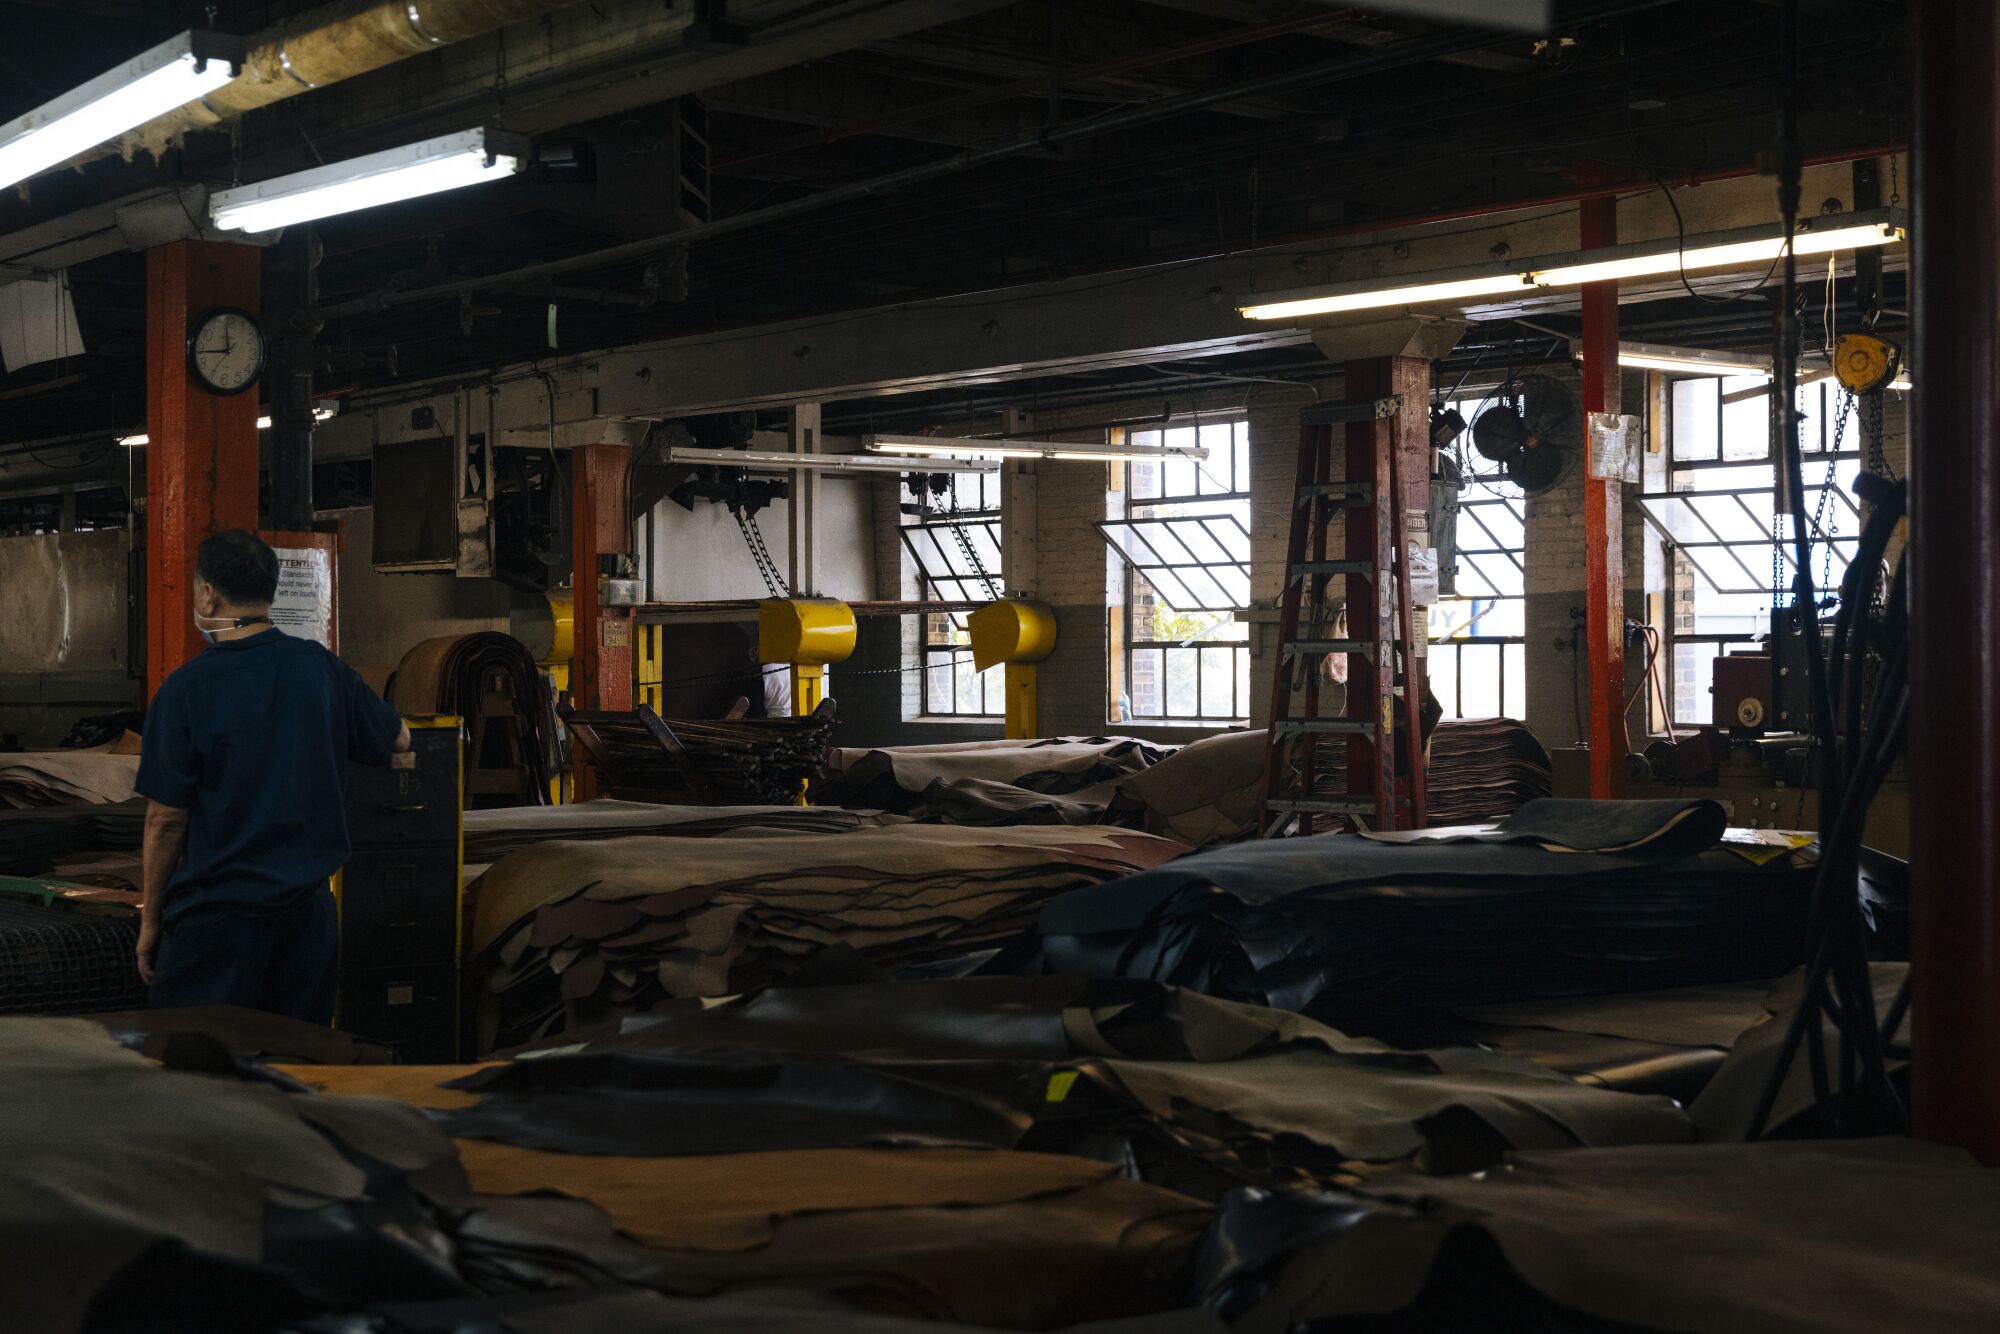 A worker walks among stacks of leather at the Horween Leather Company.